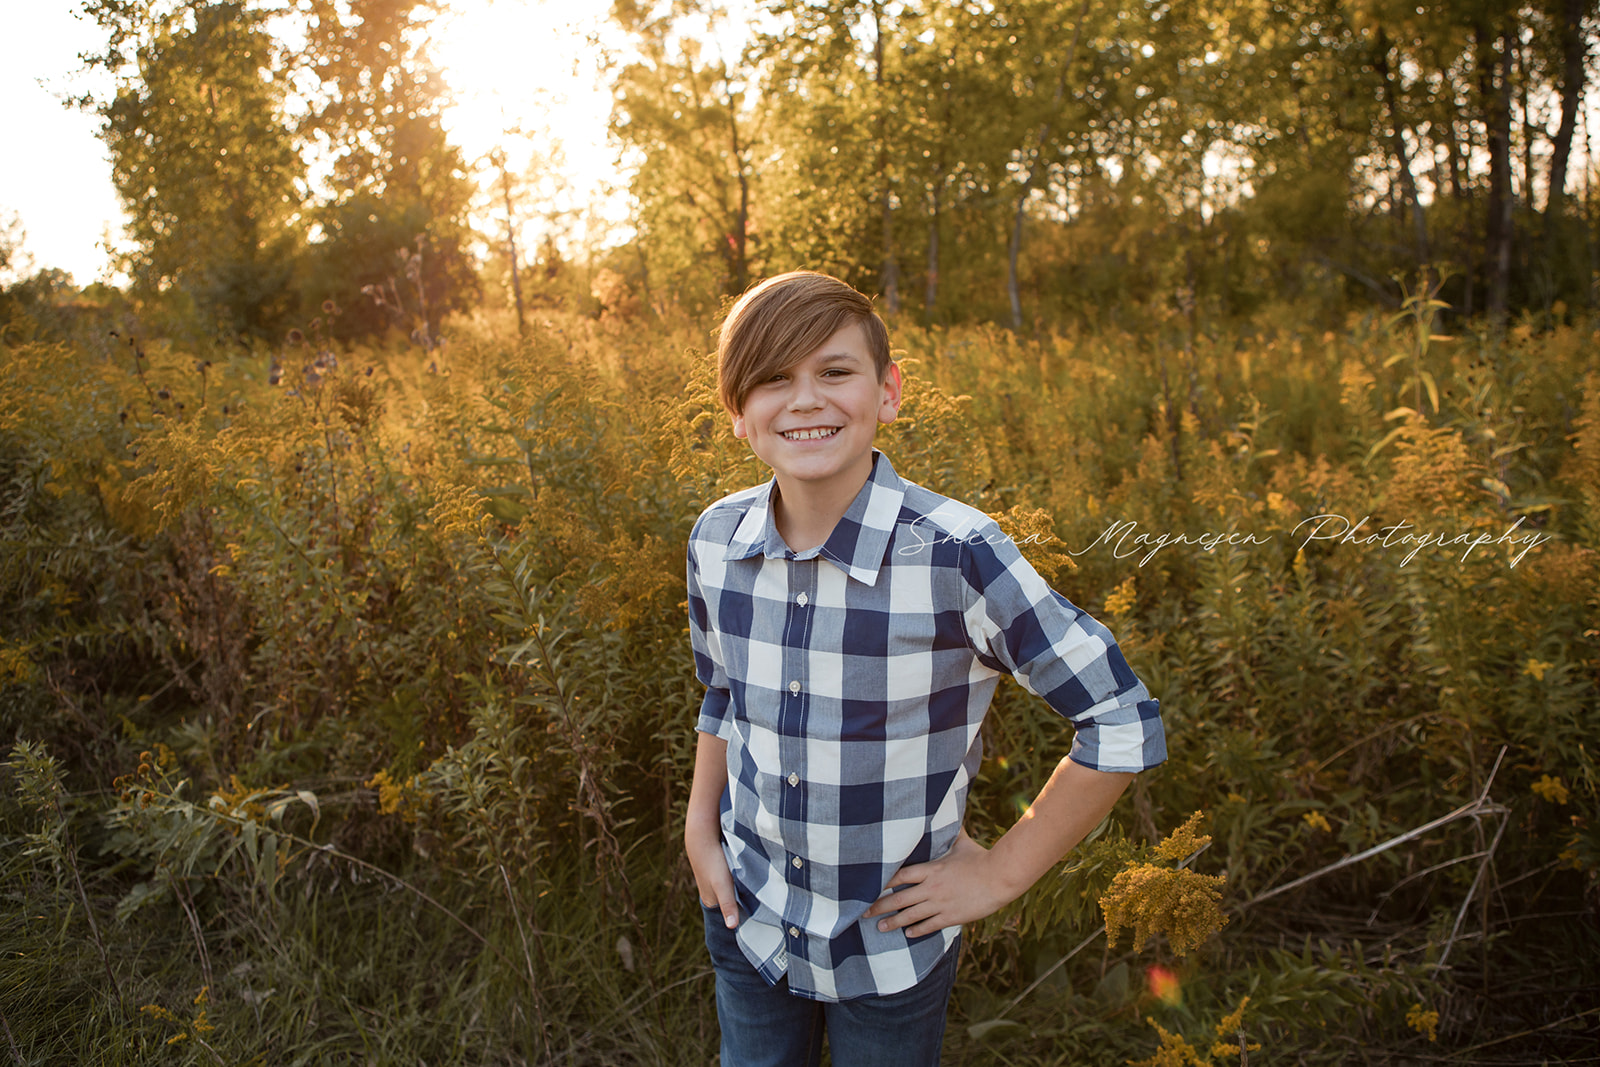 Outdoor Fall family session in Naperville during the golden sunset hour.